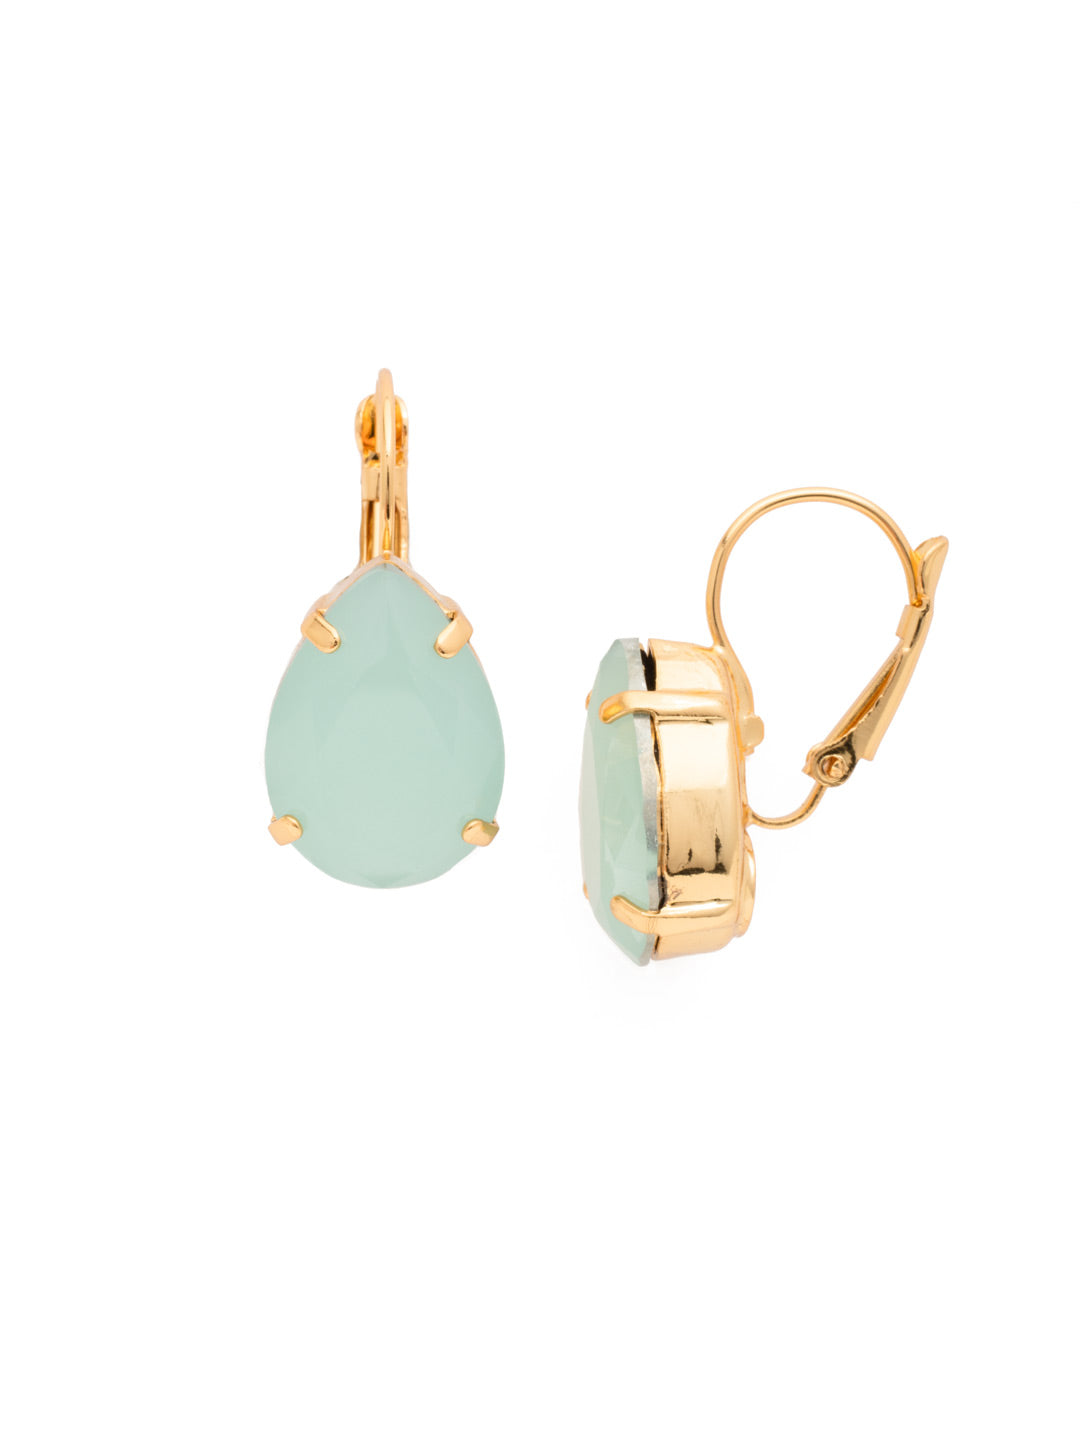 Classic Teardrop French Wire Earring - ECR104BGPAC - <p>A beautifully basic drop earring. These classic teardrop french wire earrings are perfect for any occasion, especially the everyday look. A timeless treasure that will sparkle season after season. From Sorrelli's Pacific Opal collection in our Bright Gold-tone finish.</p>